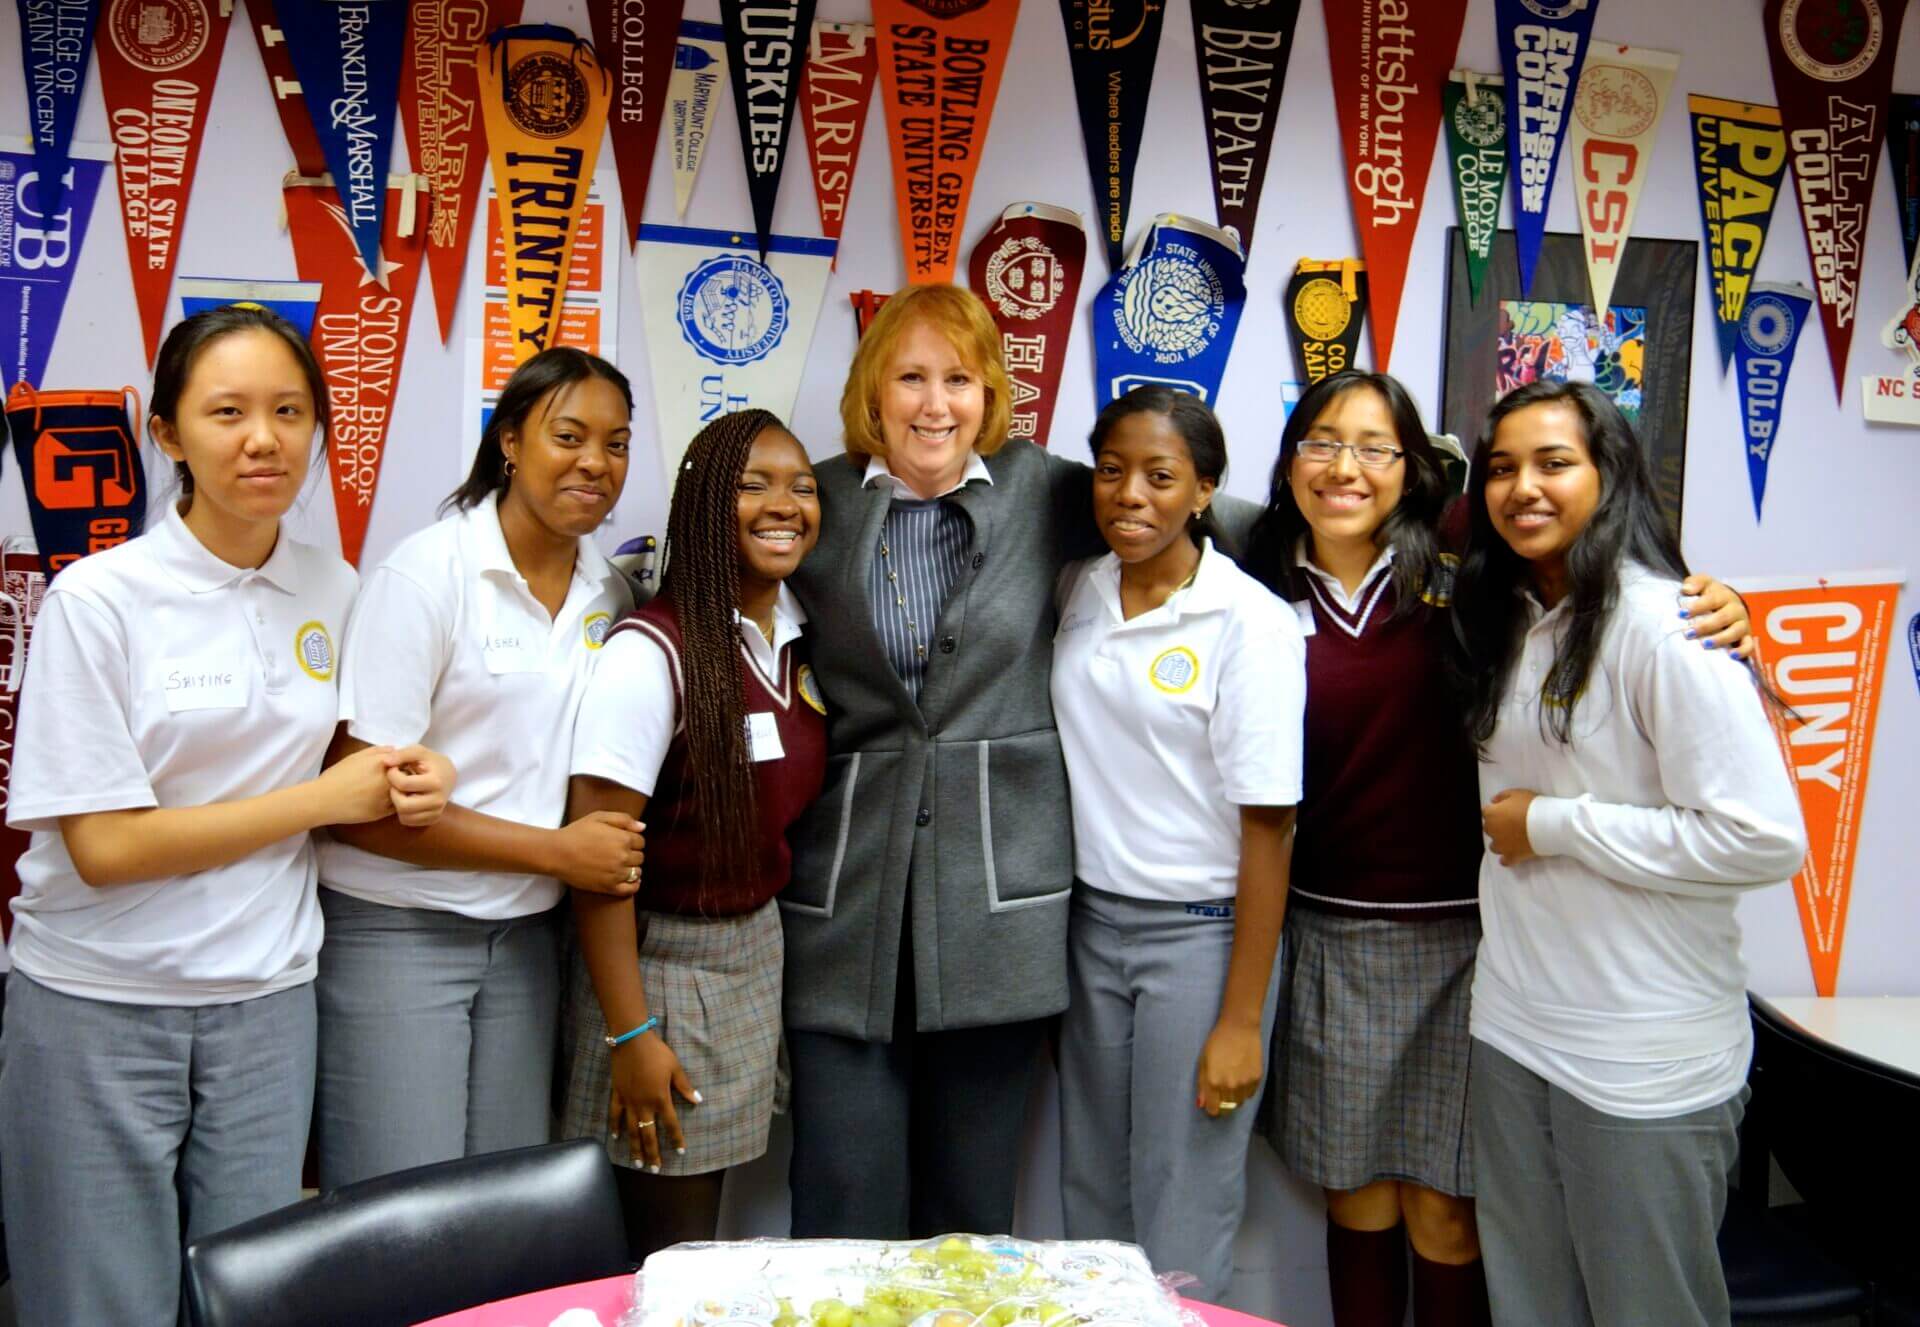 Ann Tisch is standing with students in their college office. Colorful college pennants line the wall behind them.